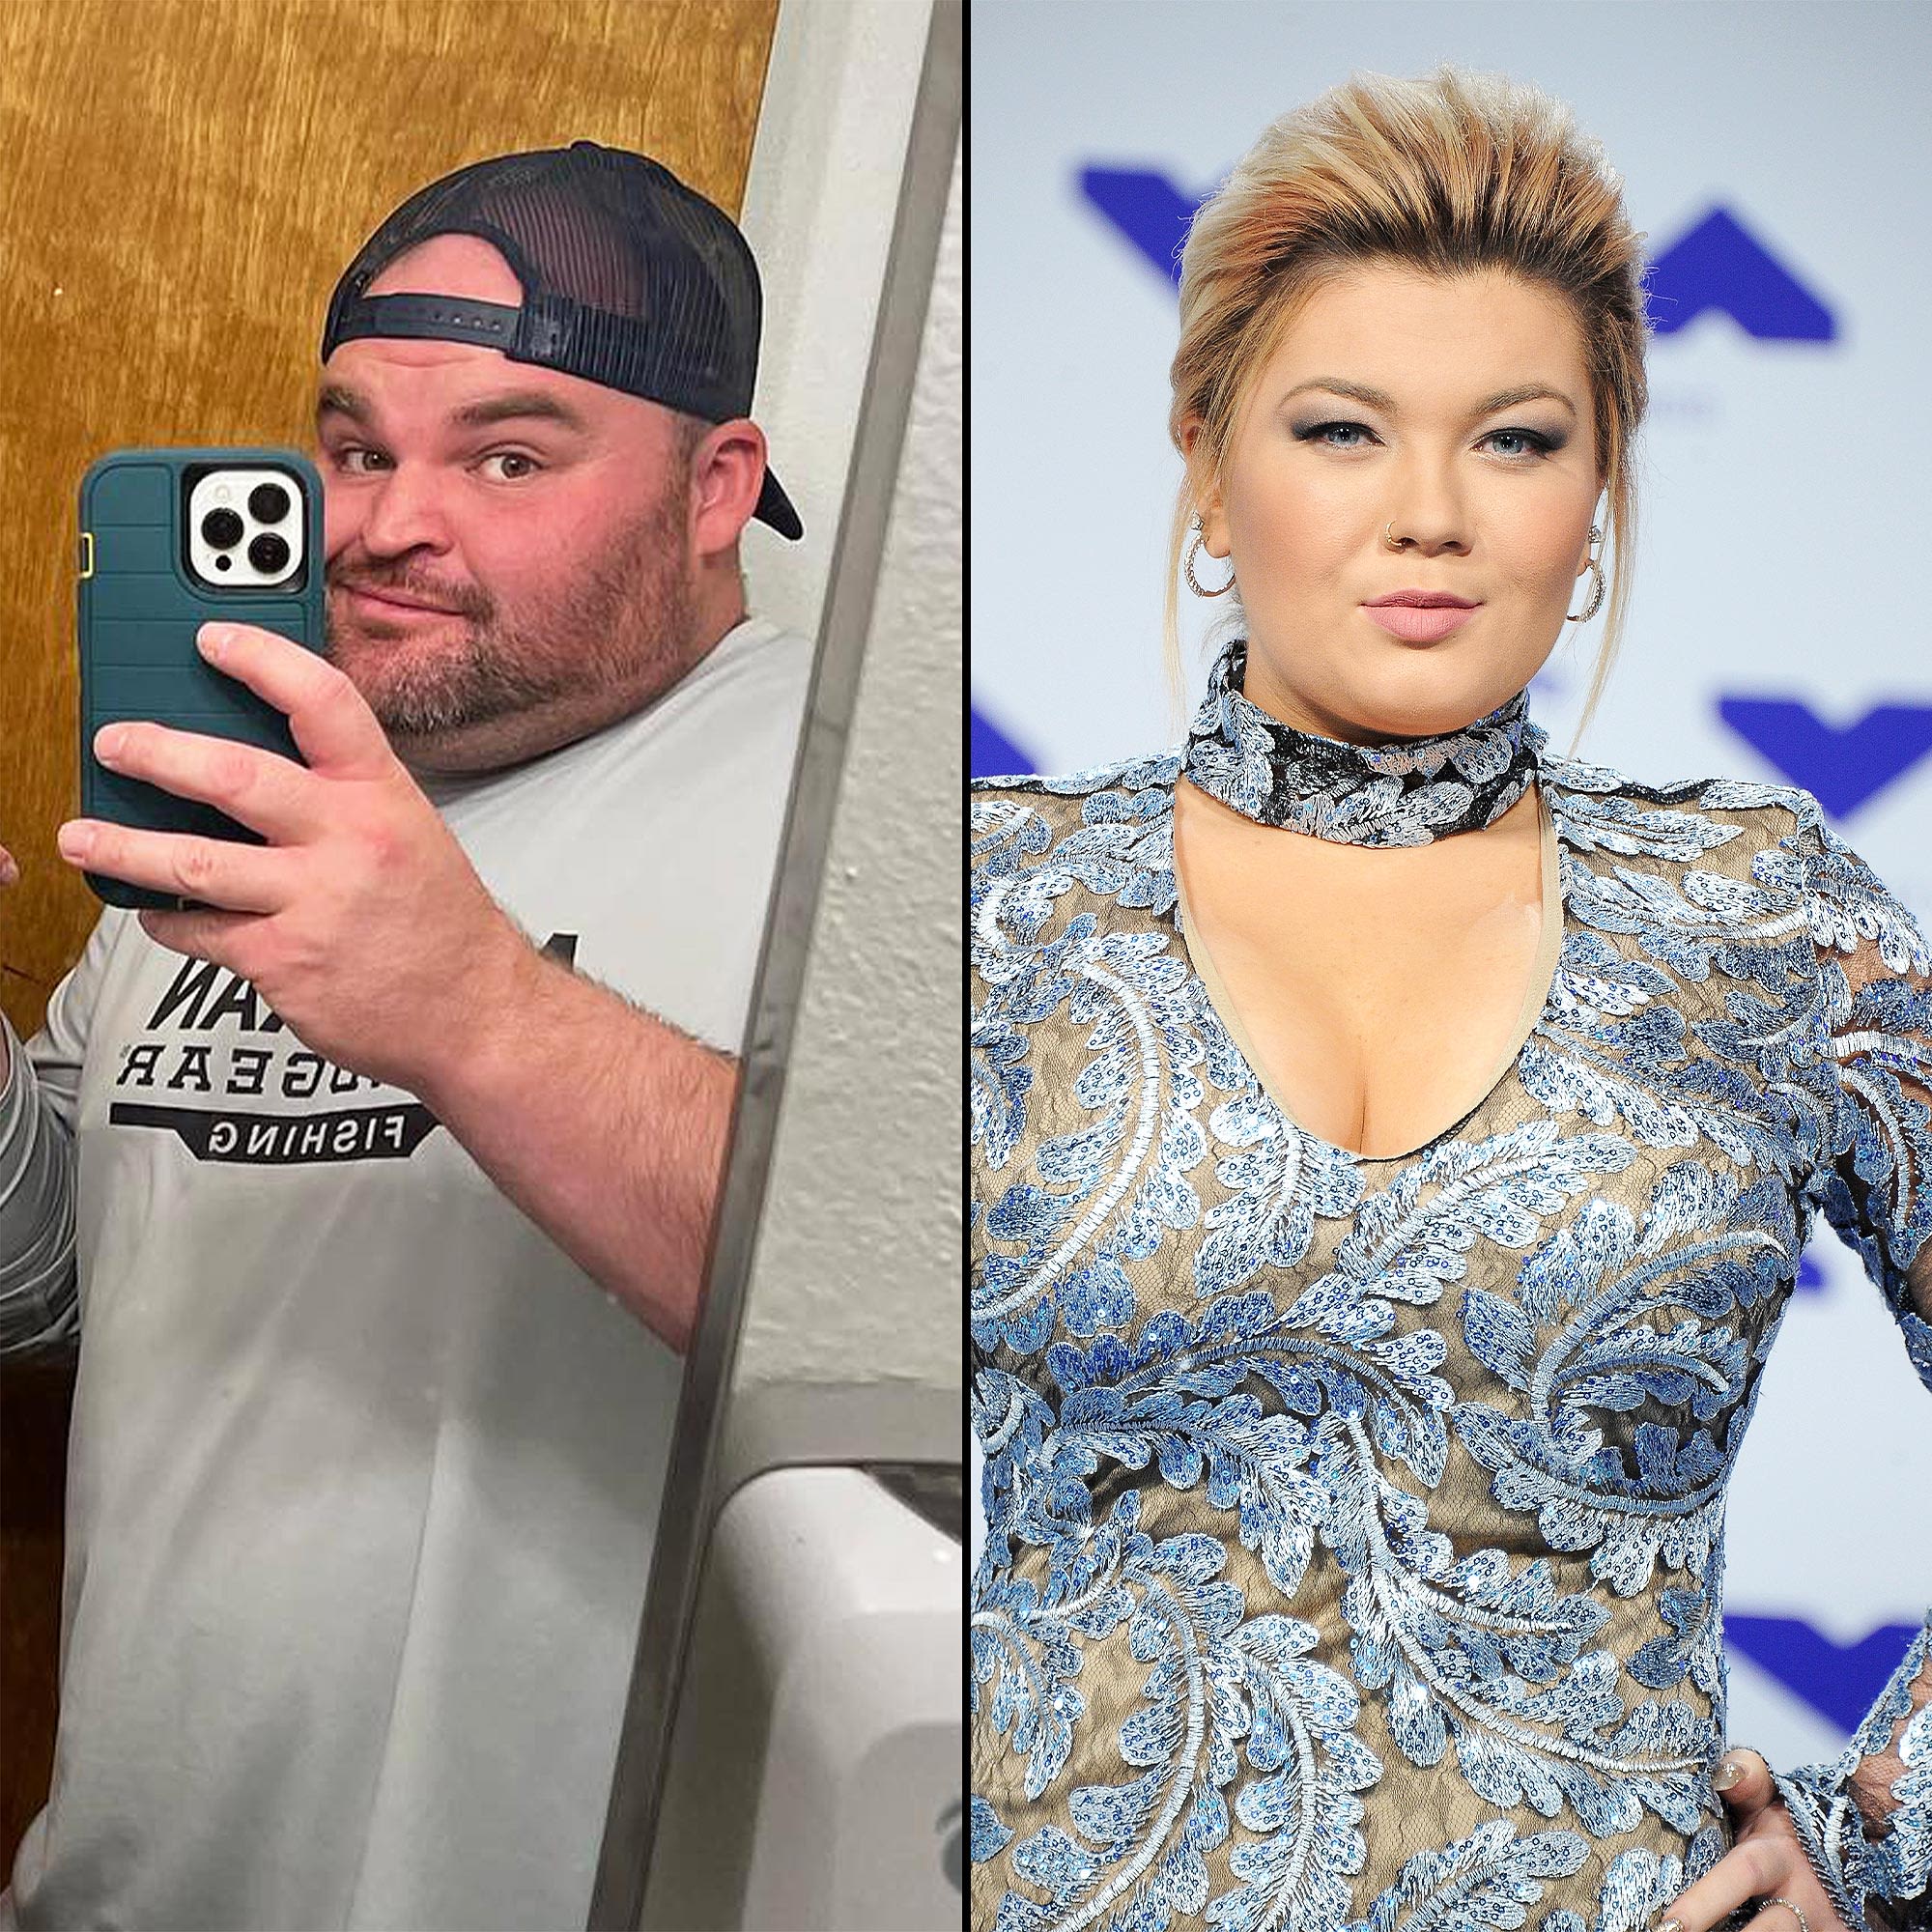 Teen Mom’s Gary Shirley Says Amber Portwood’s Daughter Leah Wants to Be Adopted by Her Stepmom